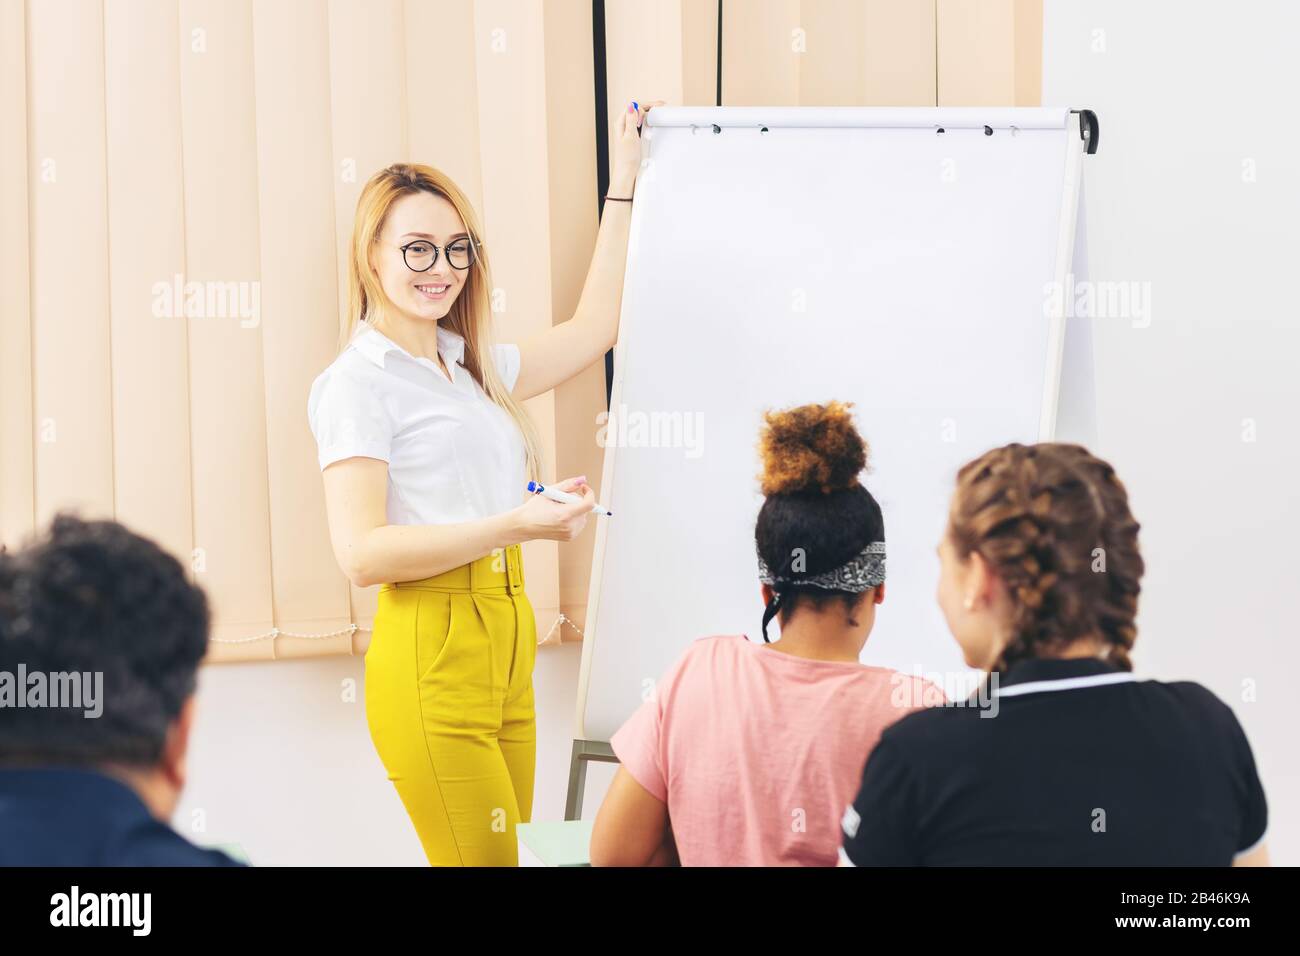 Cheerful modern young woman giving a presentation to international multiracial people Stock Photo